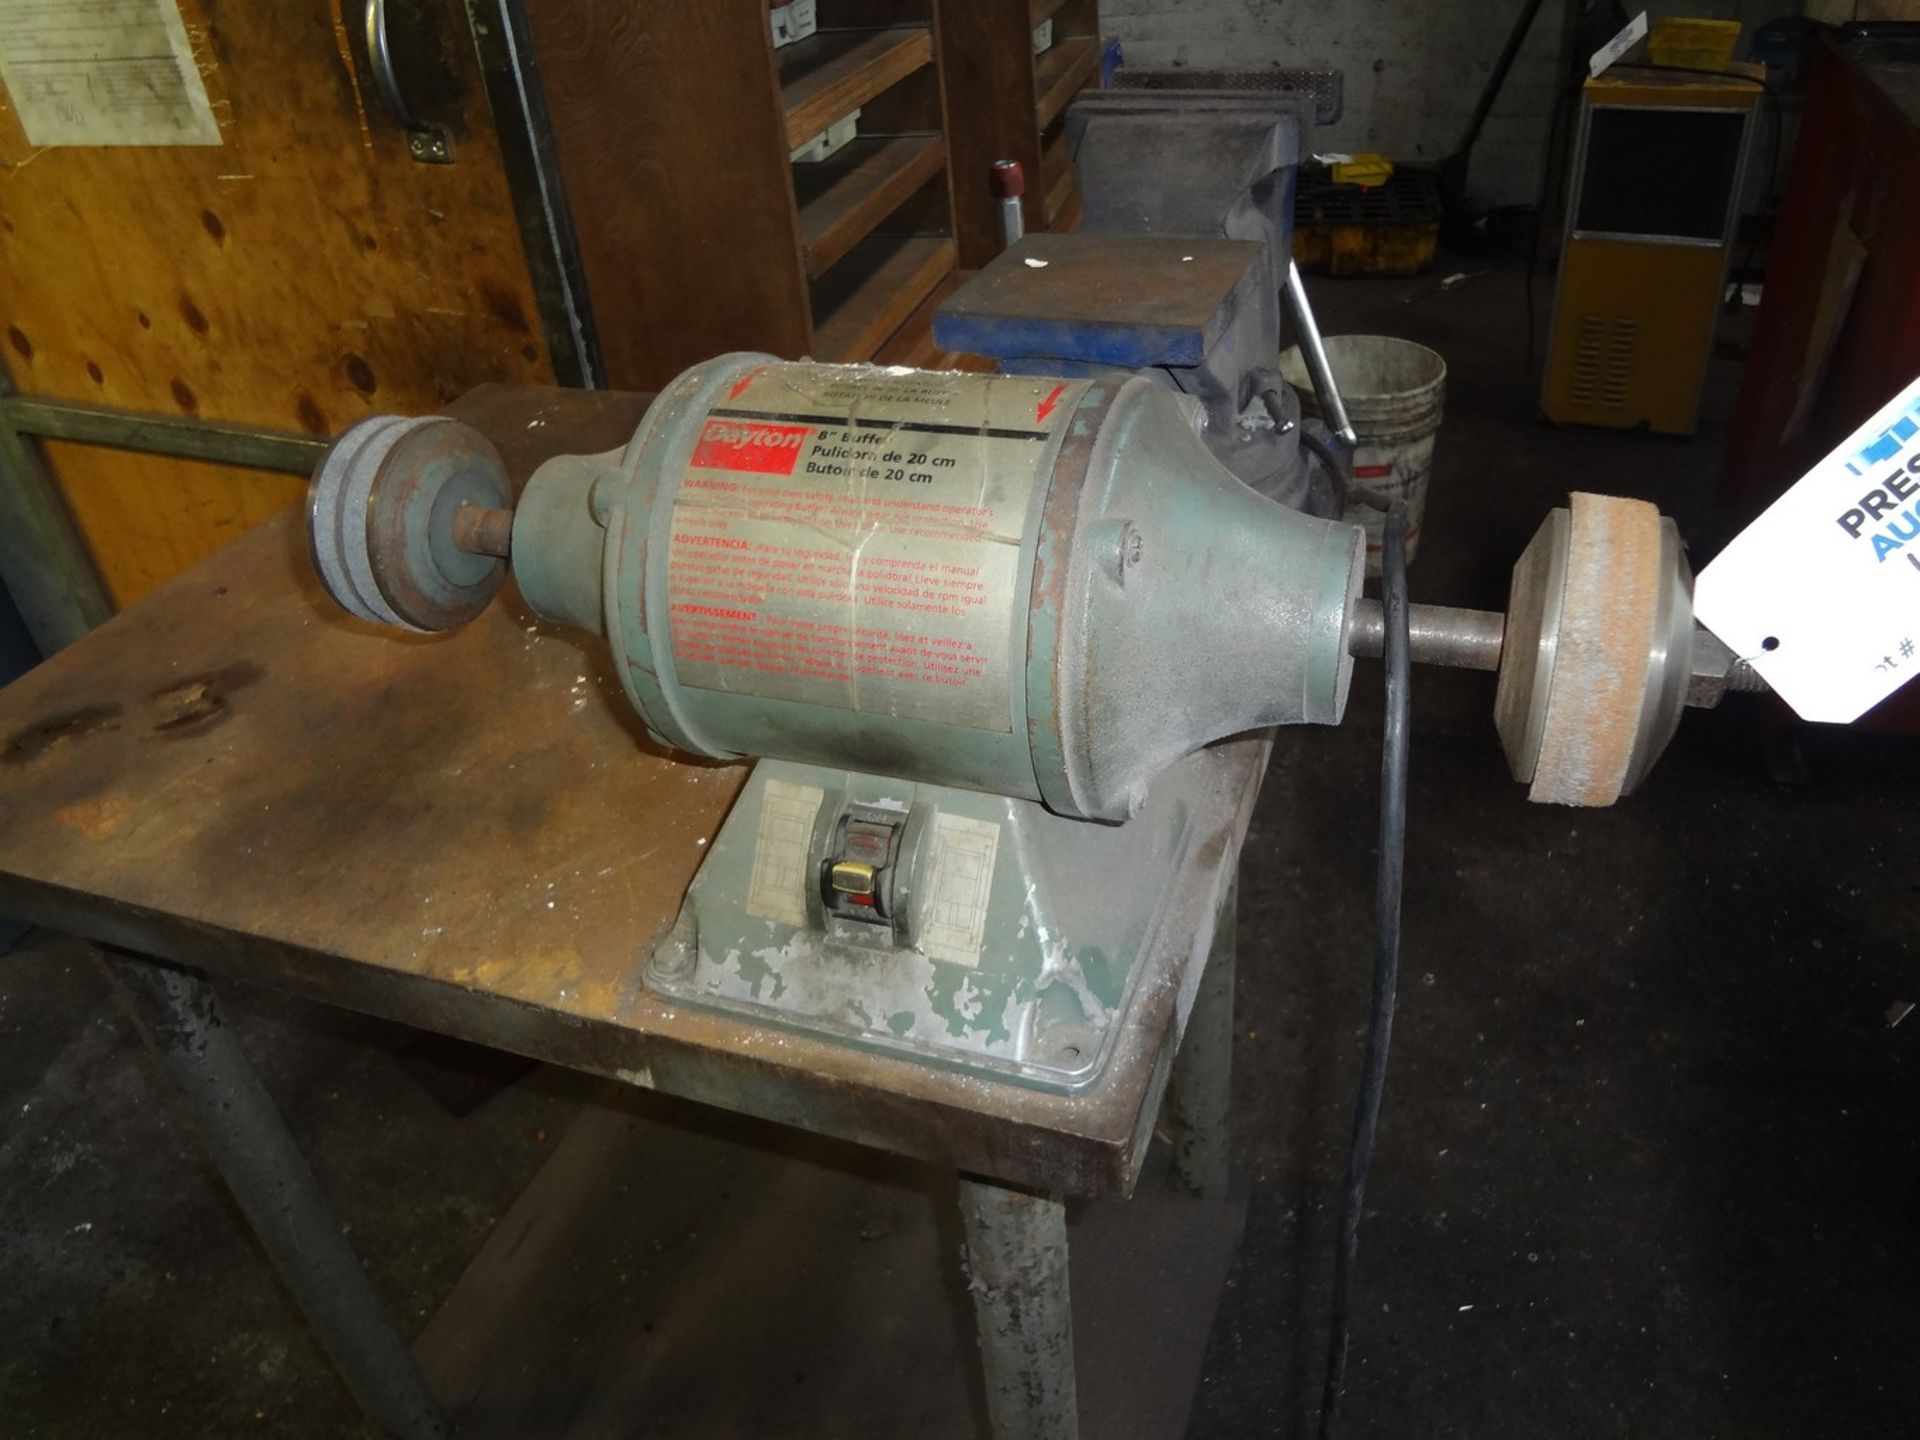 8" Dayton Double End Grinder with 6" Swivel Base Vise on Rolling Steel Table - Image 2 of 4